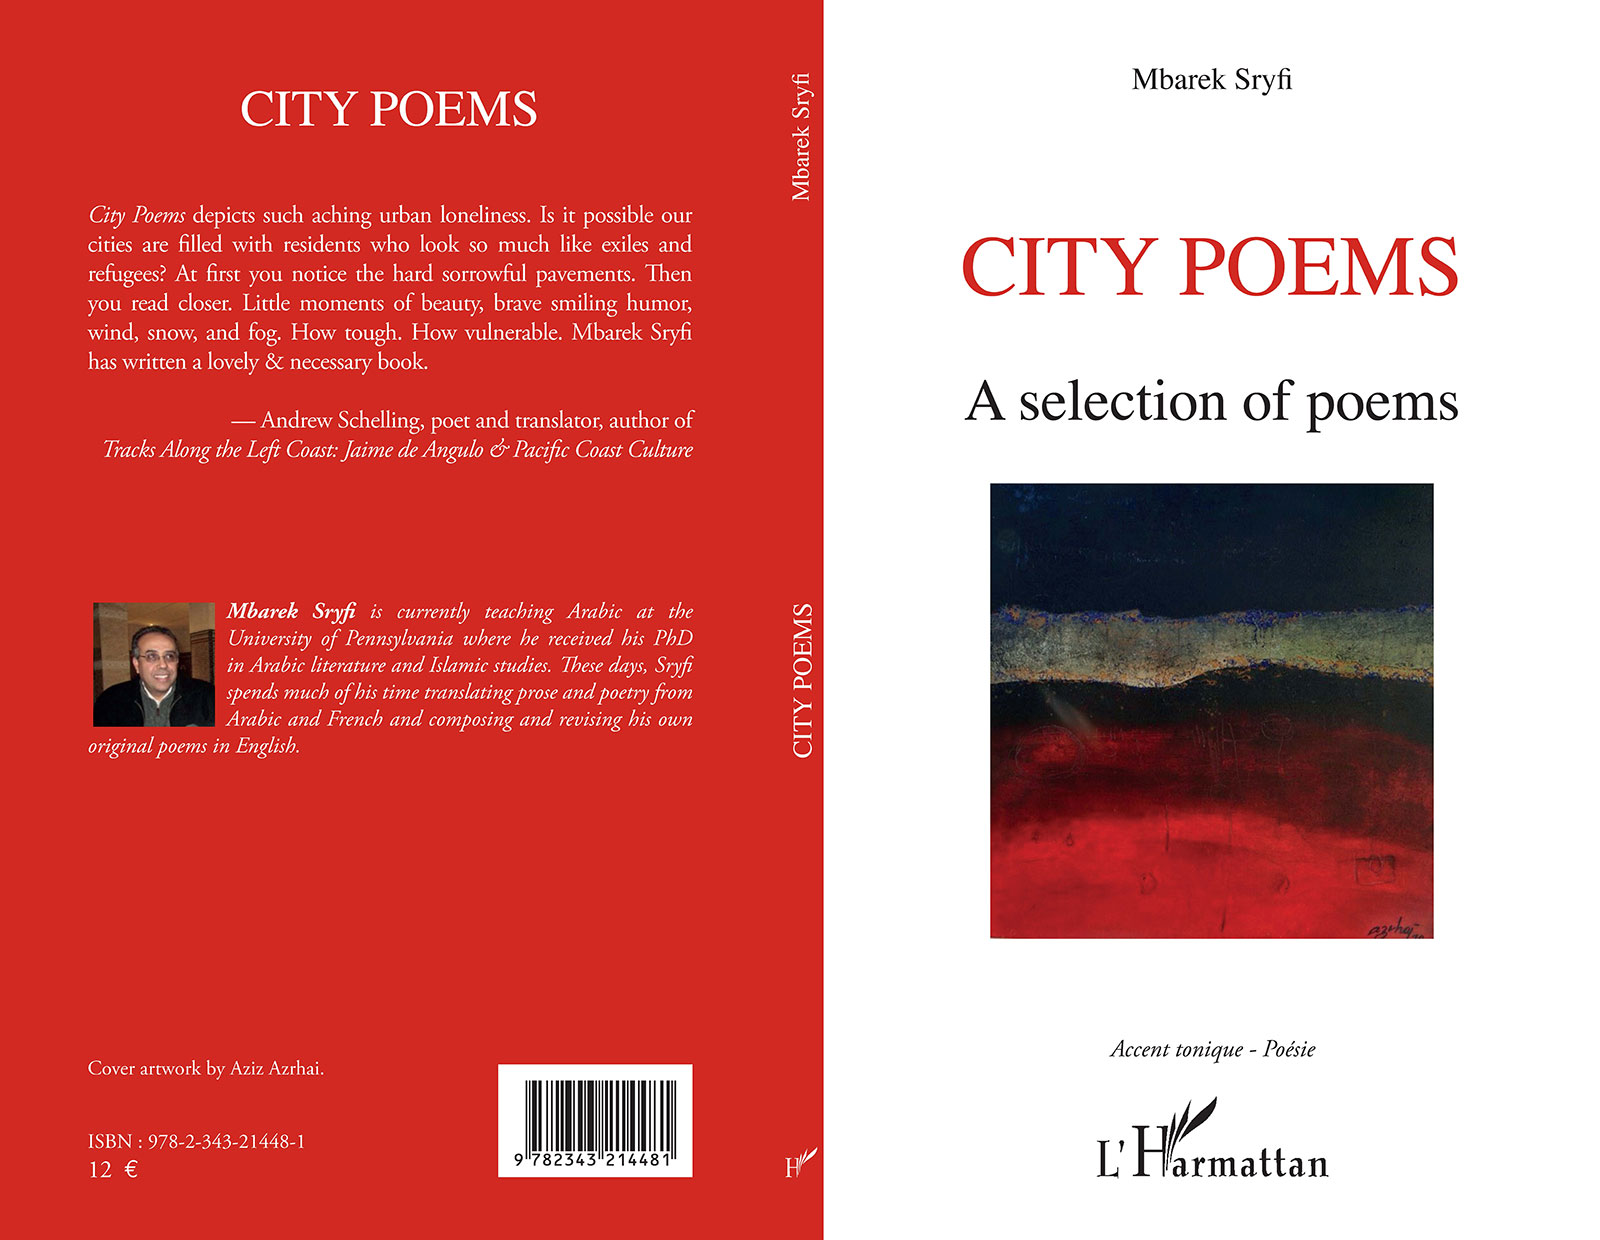 Photo Of Book Cover For The Book Entitled City Poems